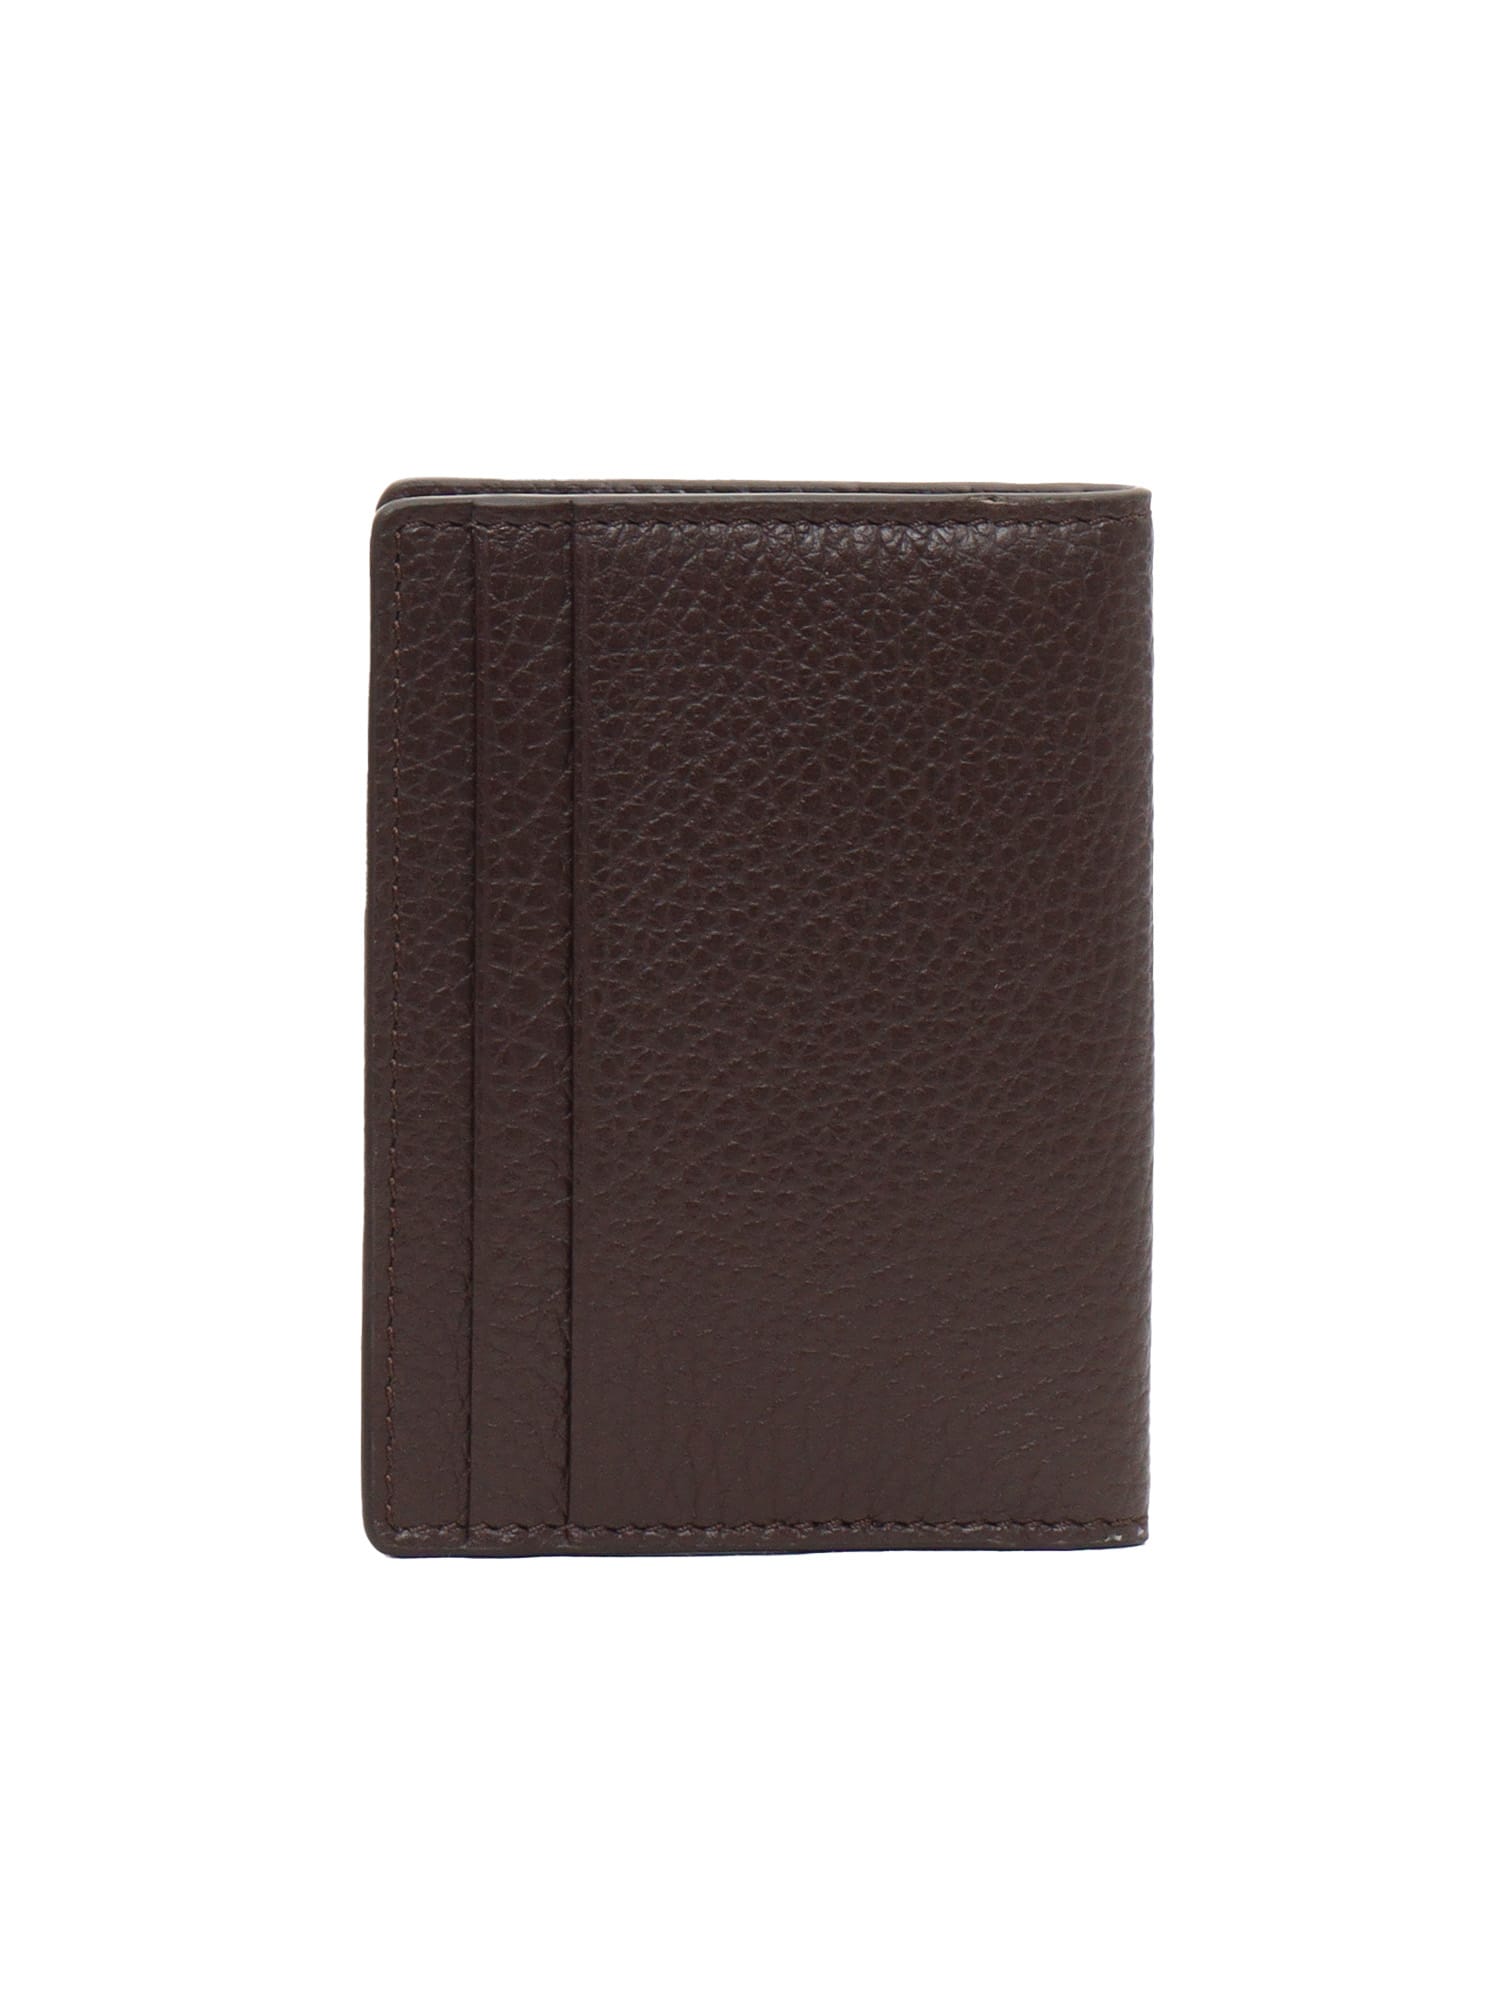 Shop Orciani Brown Wallet